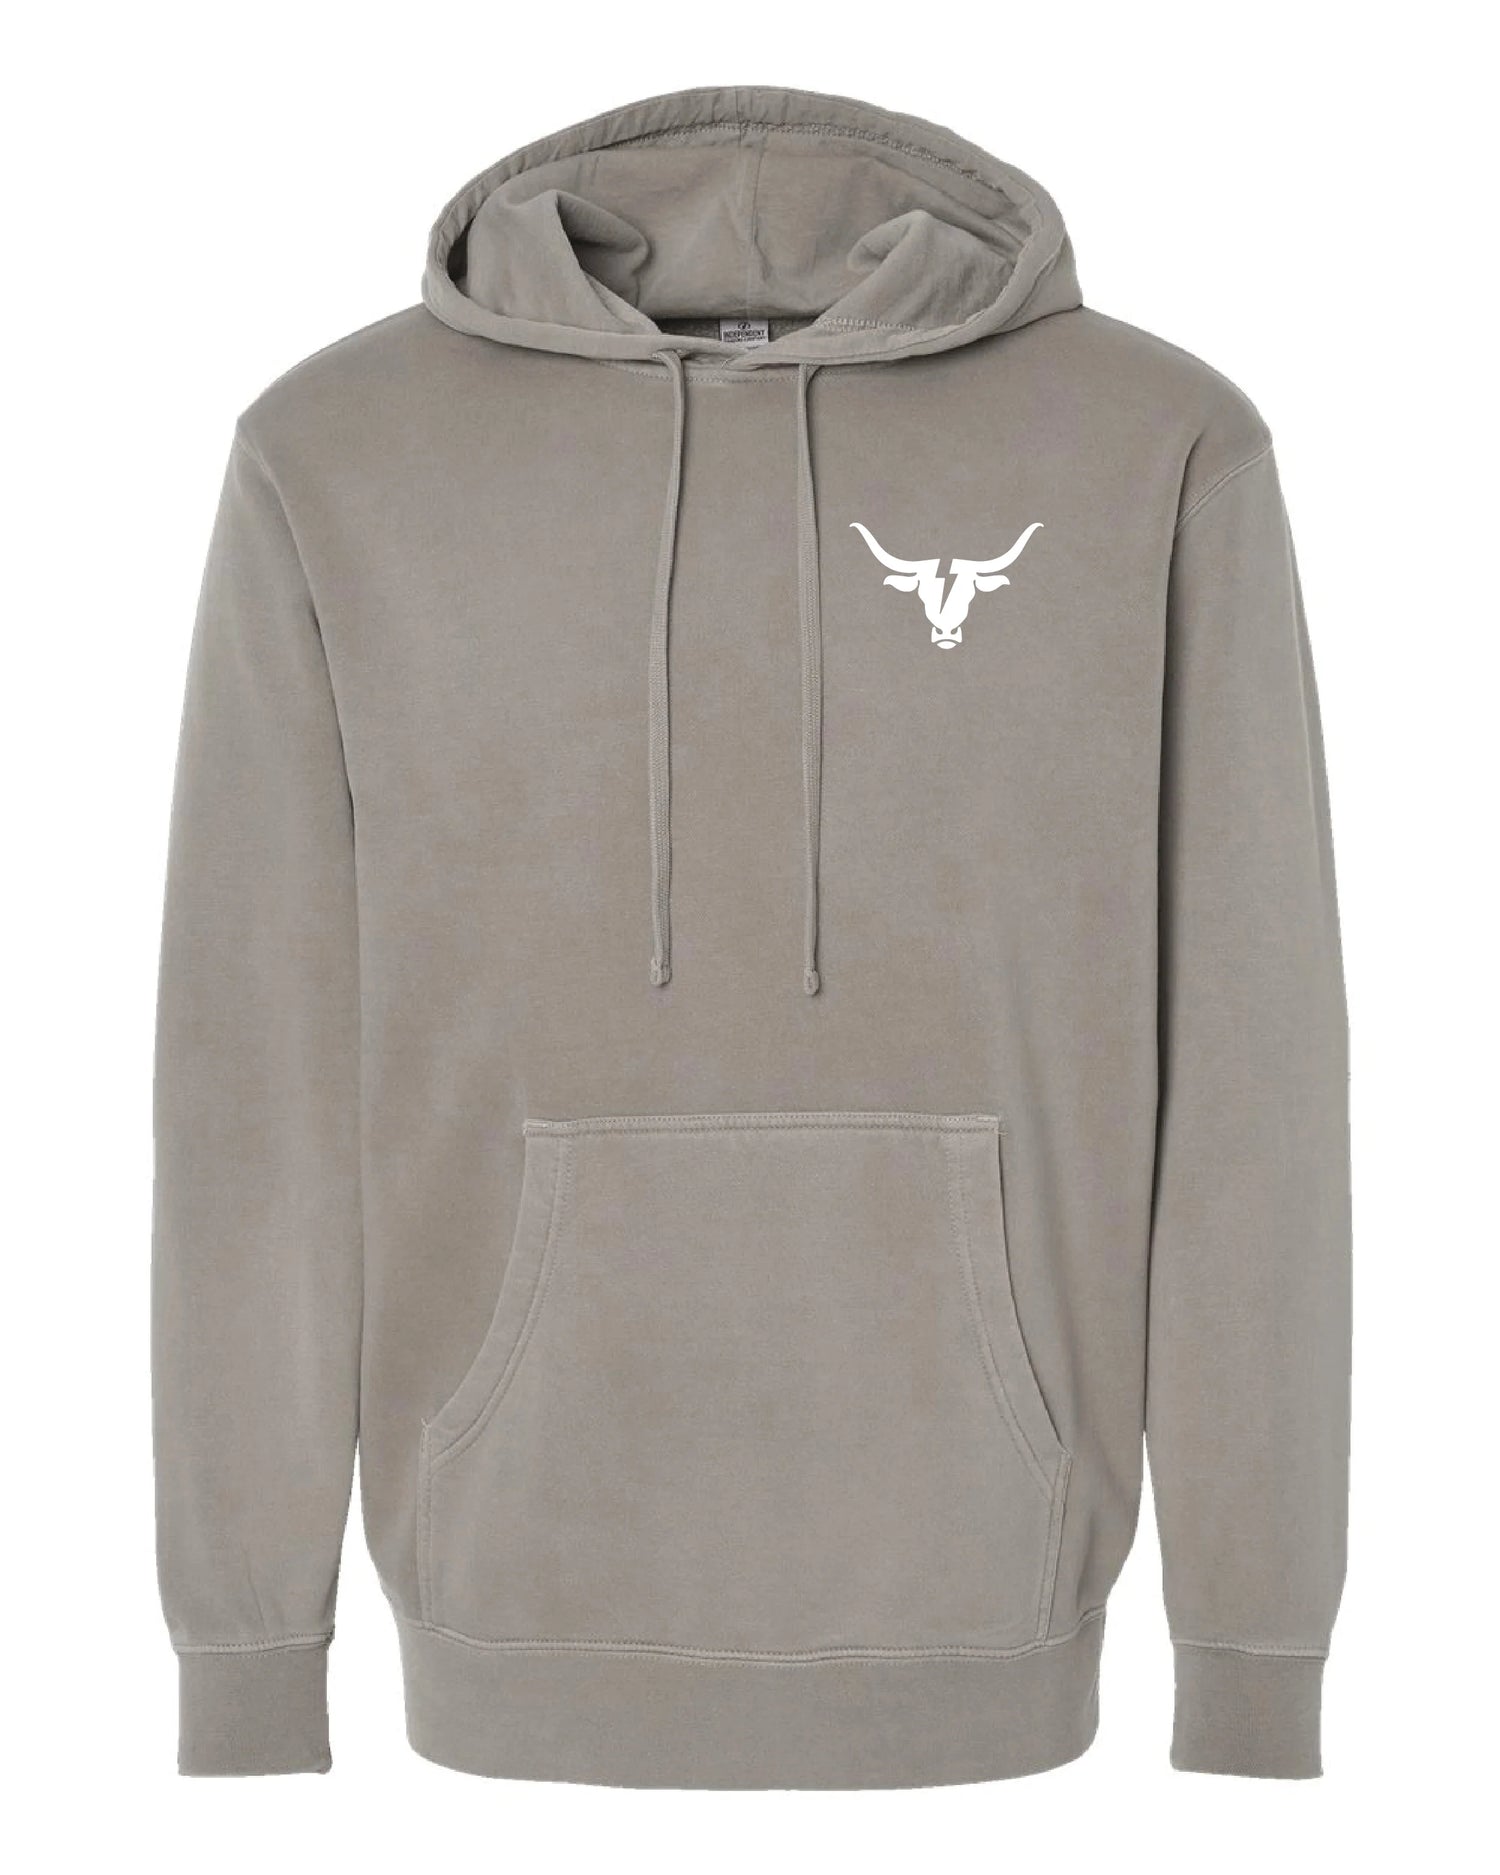 Bolt Ranch Adult Hoodie - Cement